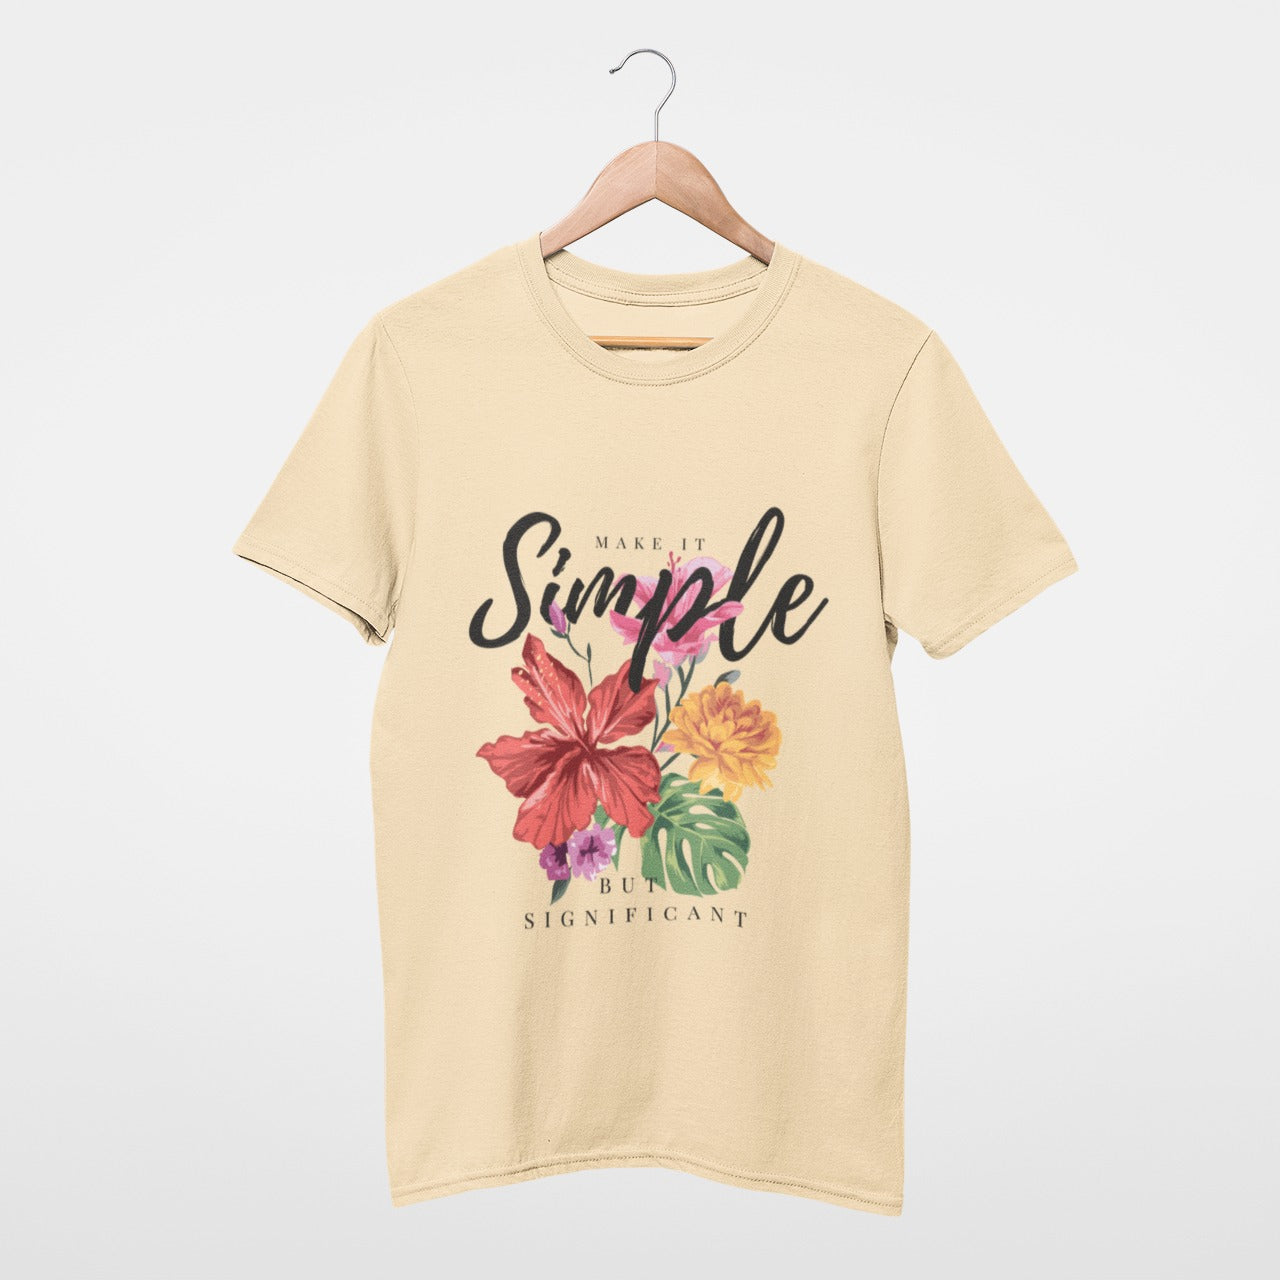 Make it simple but significant Tee